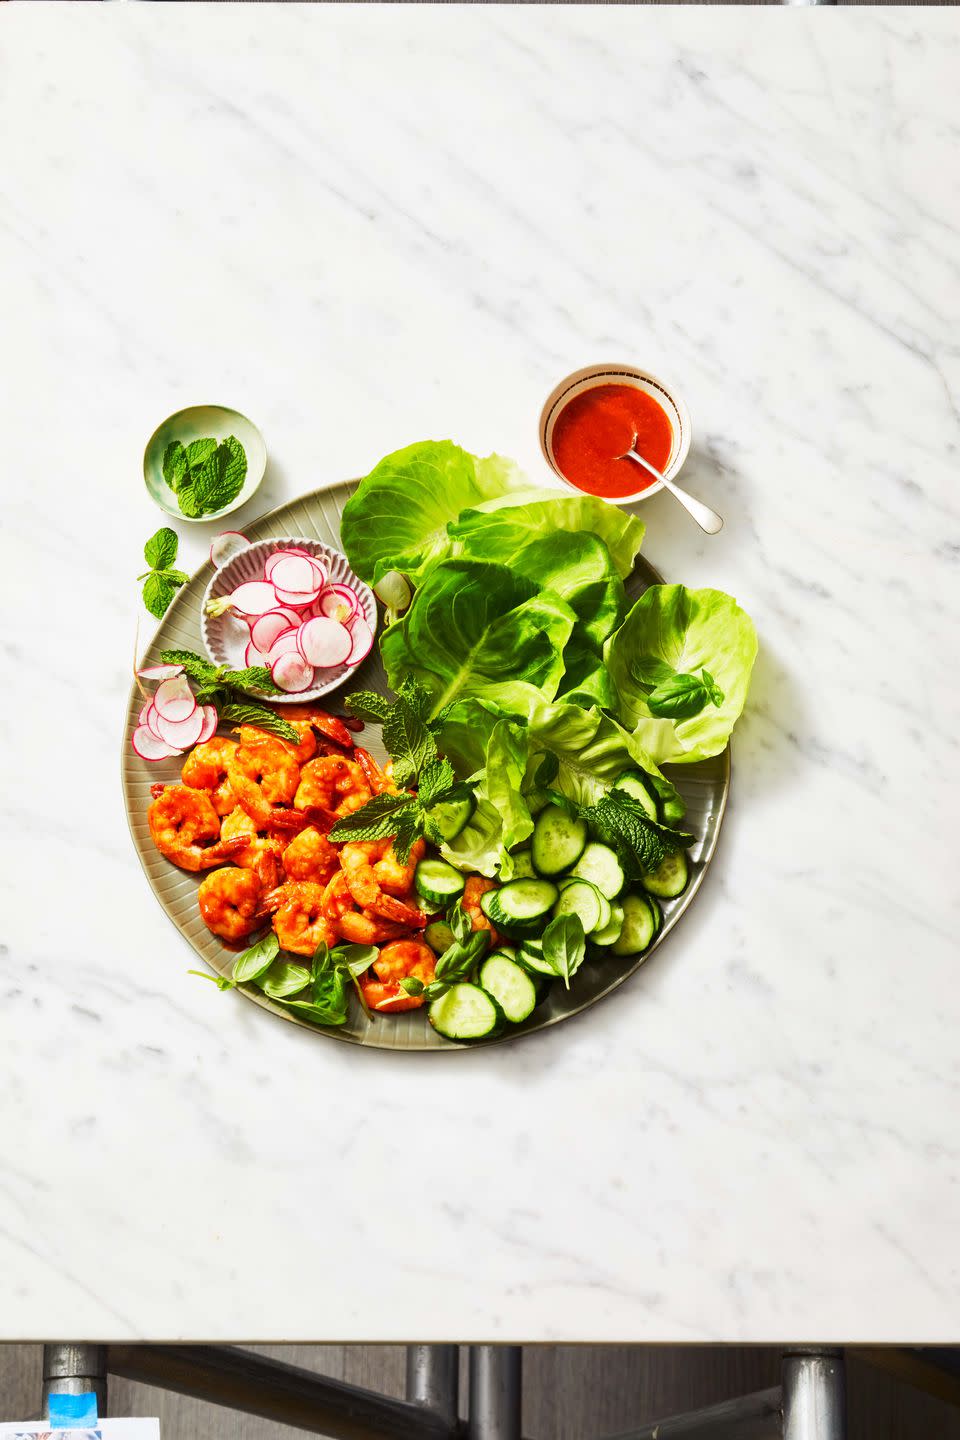 <p>Set out a tray of healthy shrimp lettuce wraps made with veggies and fresh herbs for dinner tonight!</p><p>Get the <strong><a href="https://www.goodhousekeeping.com/food-recipes/easy/a37198848/shrimp-lettuce-wraps-recipe/" rel="nofollow noopener" target="_blank" data-ylk="slk:Spicy Shrimp Lettuce Wraps recipe" class="link ">Spicy Shrimp Lettuce Wraps recipe</a></strong>. </p><p><strong>RELATED: </strong><a href="https://www.goodhousekeeping.com/food-recipes/healthy/g572/healthy-shrimp-recipes/" rel="nofollow noopener" target="_blank" data-ylk="slk:28 Healthy and Delicious Ways to Eat All the Shrimp" class="link ">28 Healthy and Delicious Ways to Eat All the Shrimp</a></p>